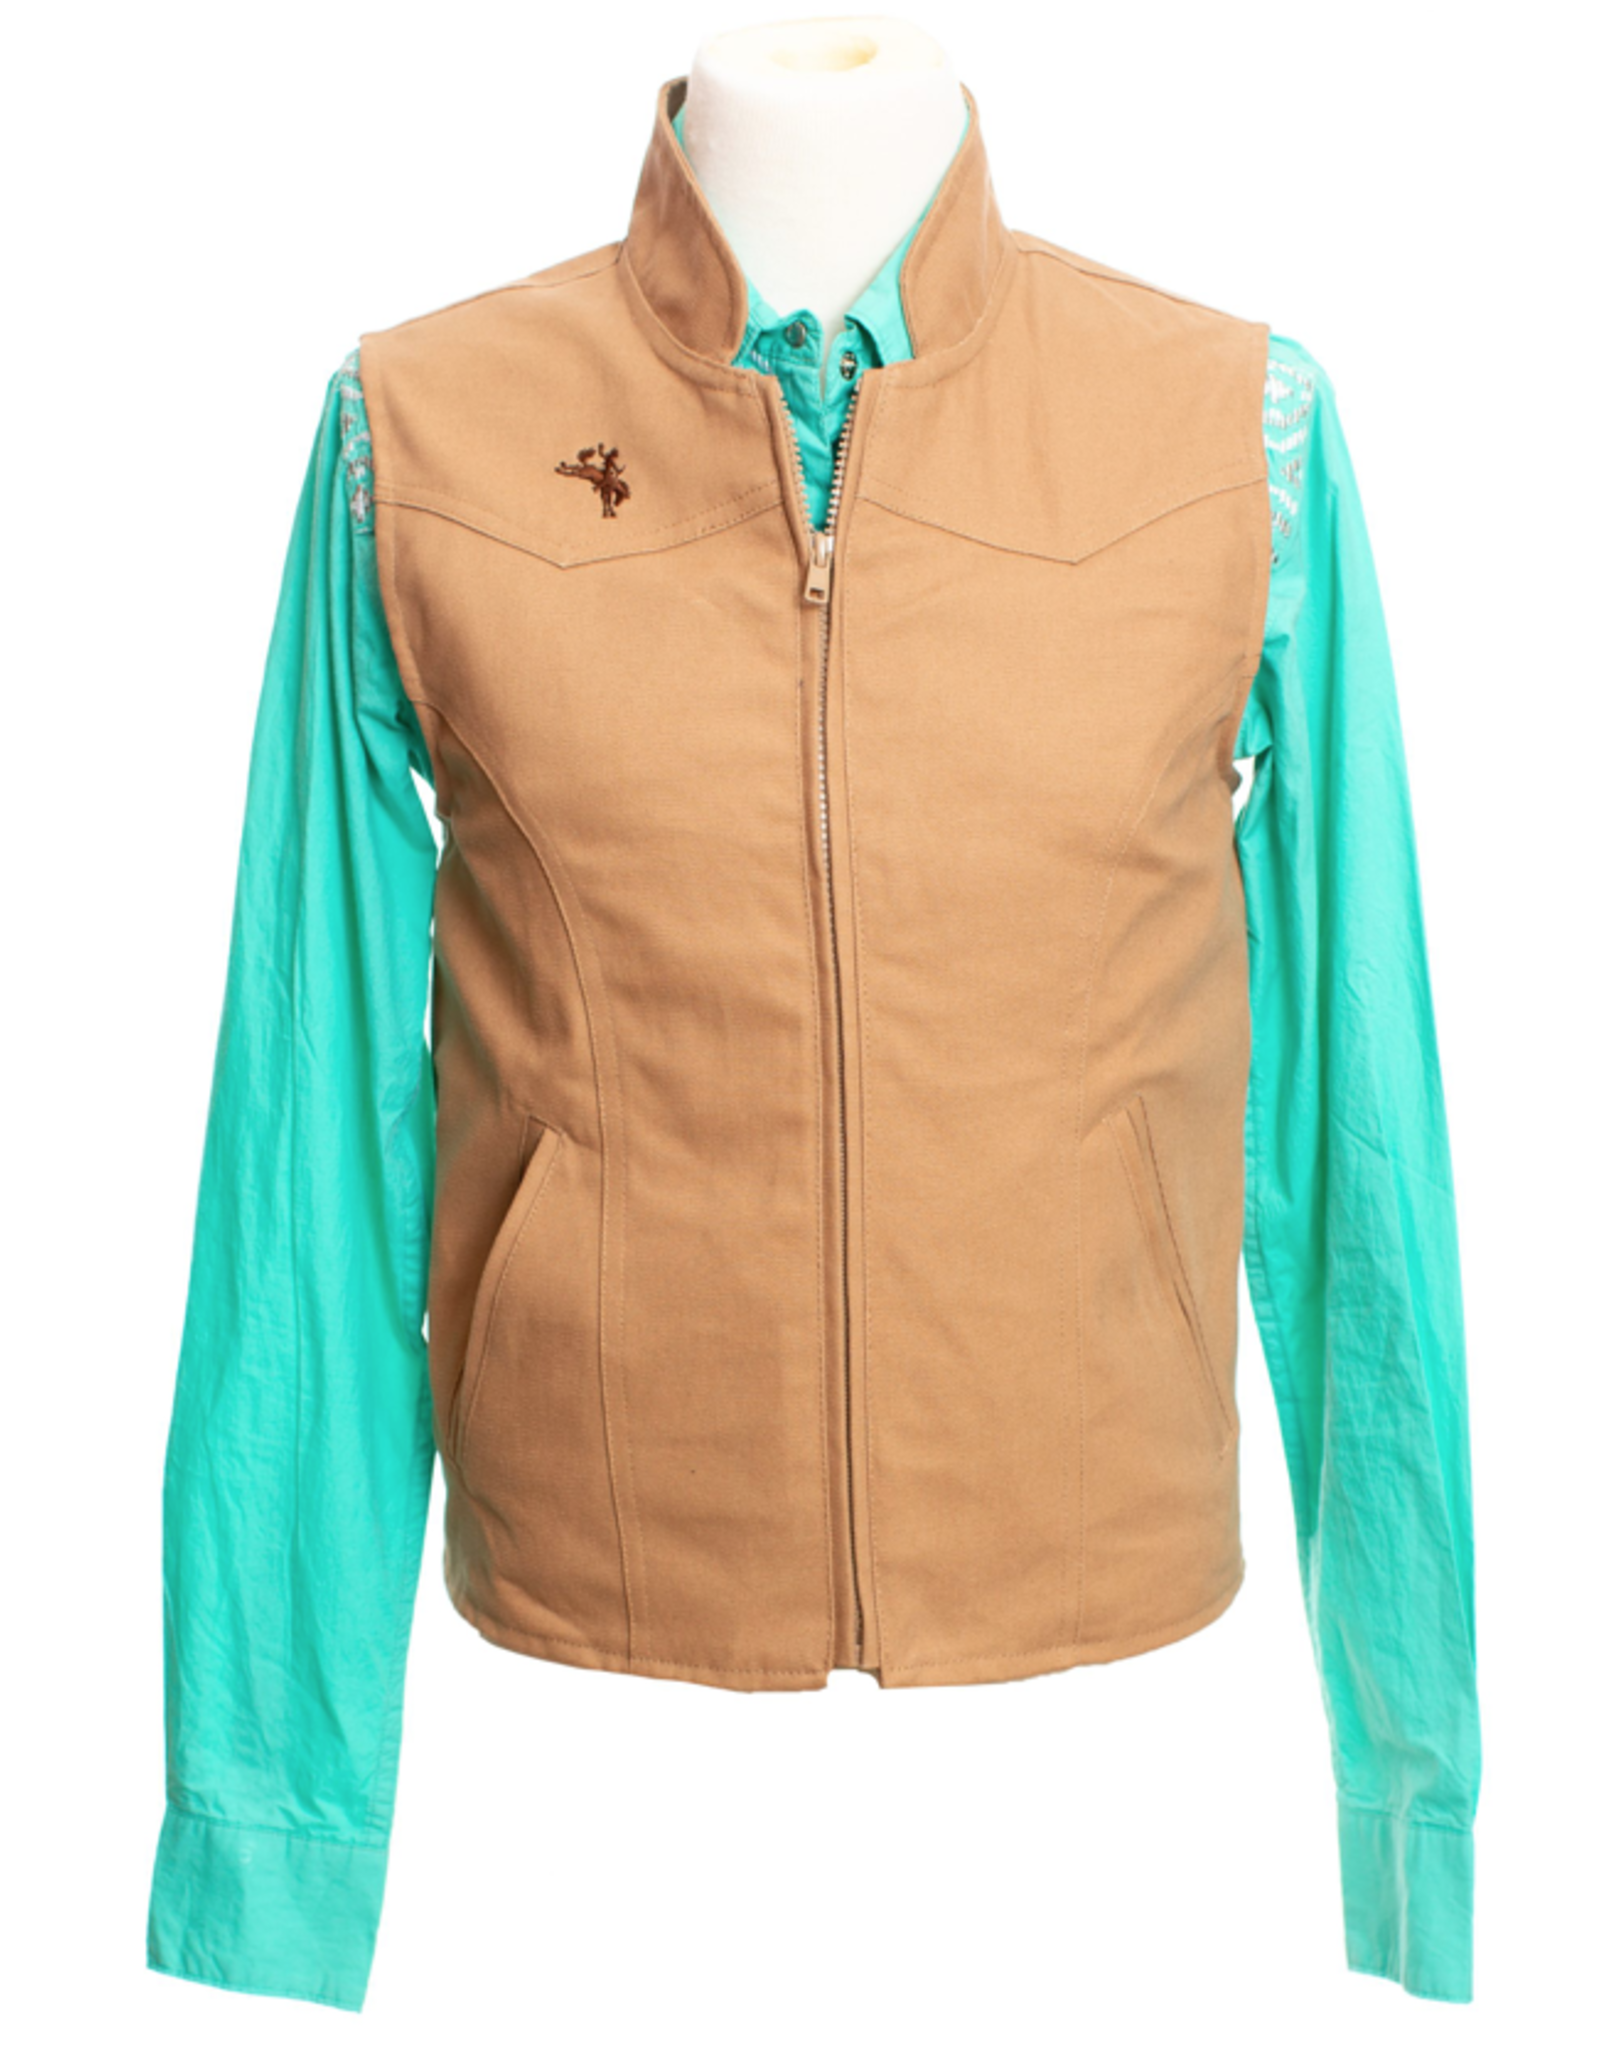 VEST TAN CALAMITY CONCEALED CARRY CANVAS